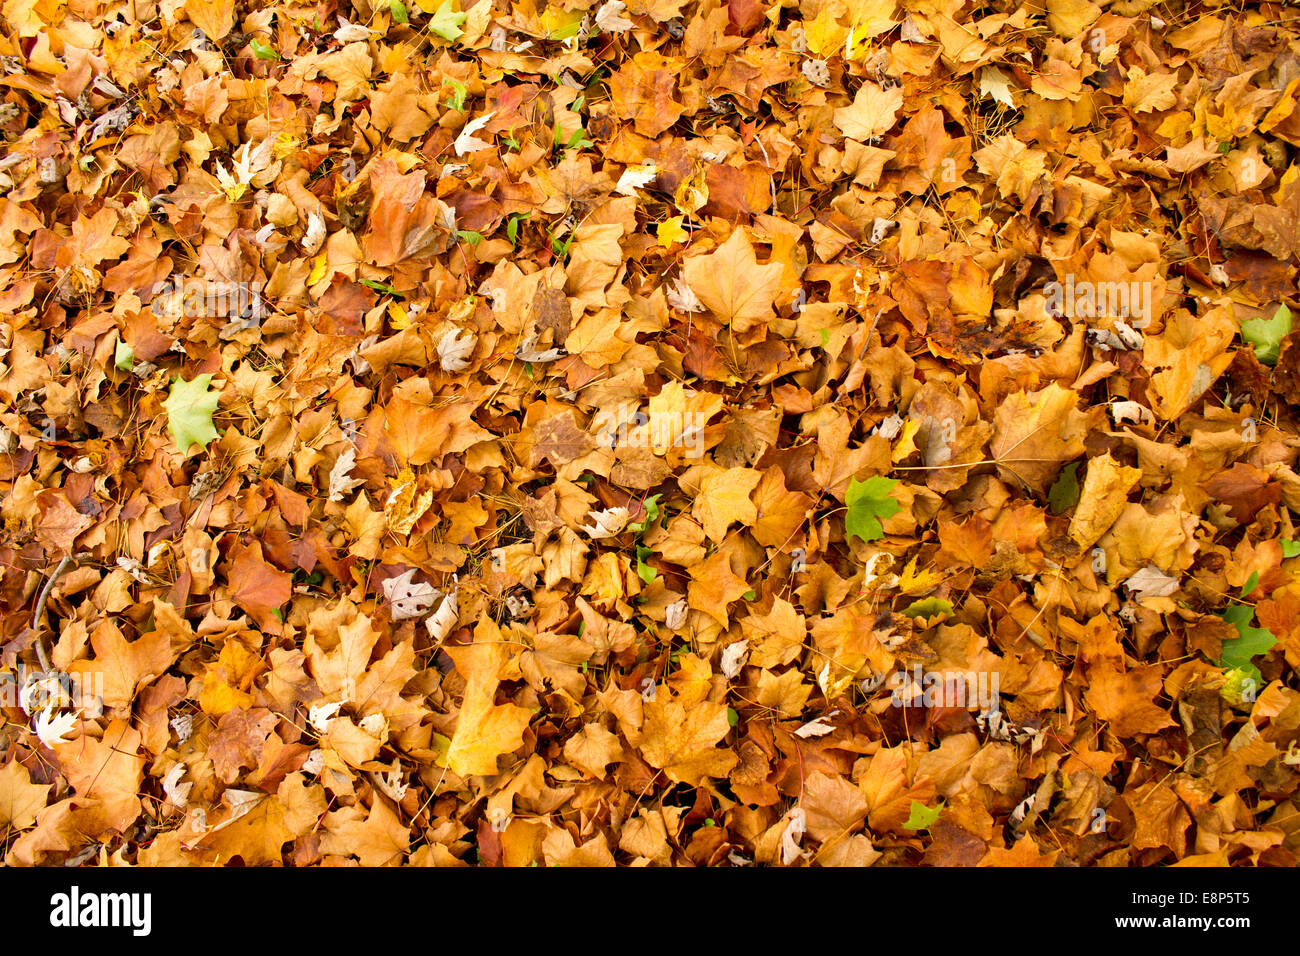 A blanket of colourful autumn leaves cover the ground. Stock Photo